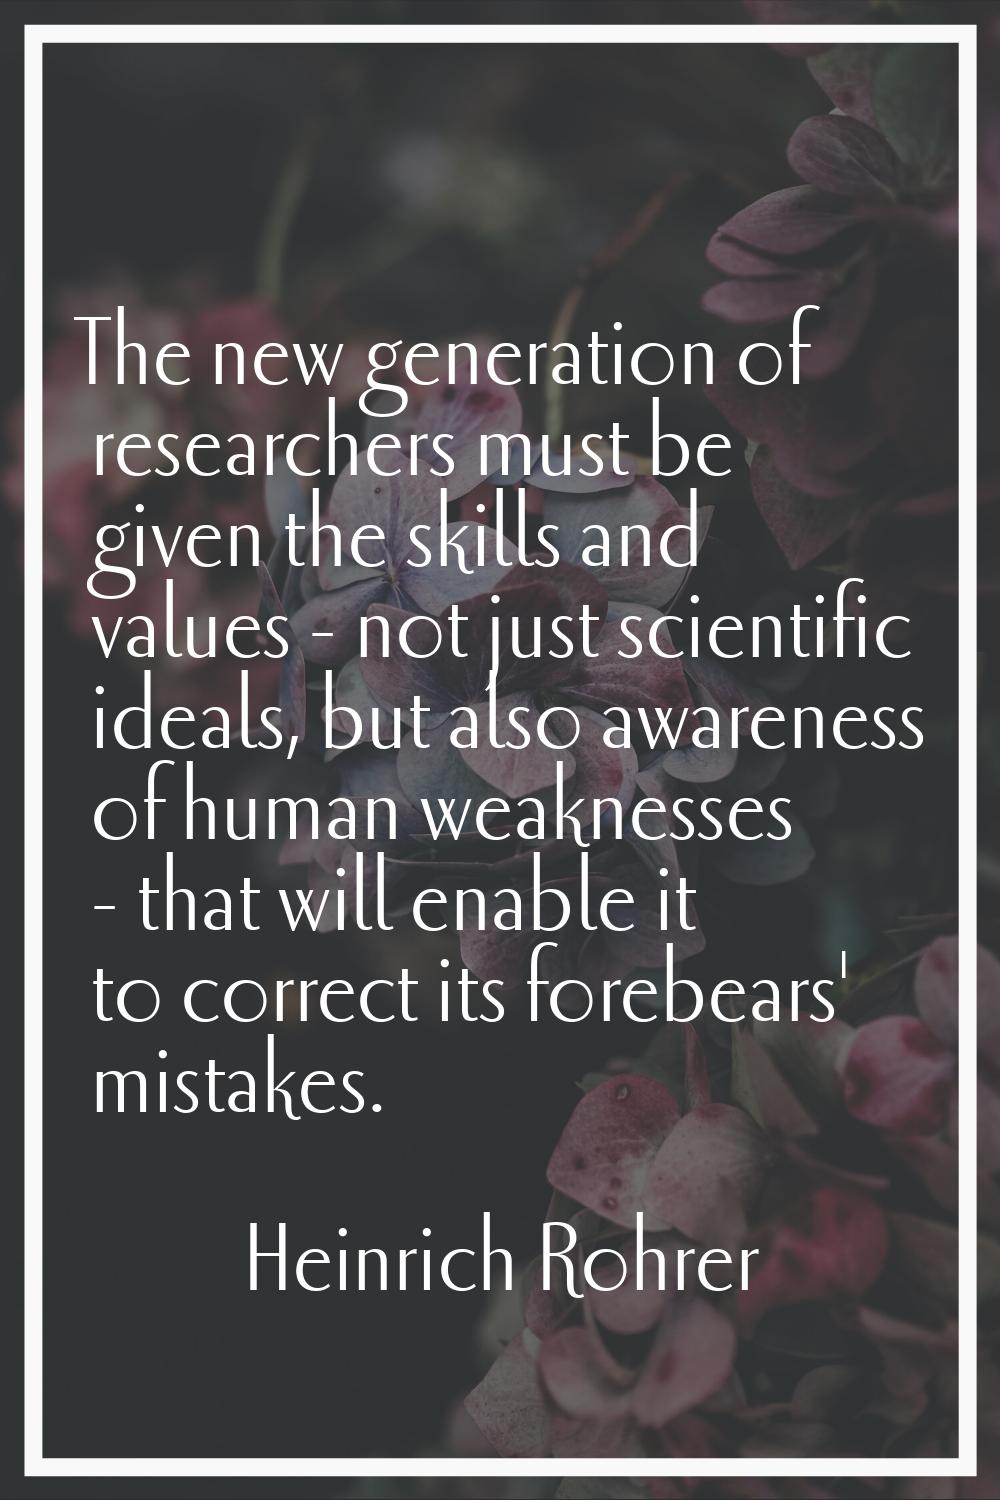 The new generation of researchers must be given the skills and values - not just scientific ideals,